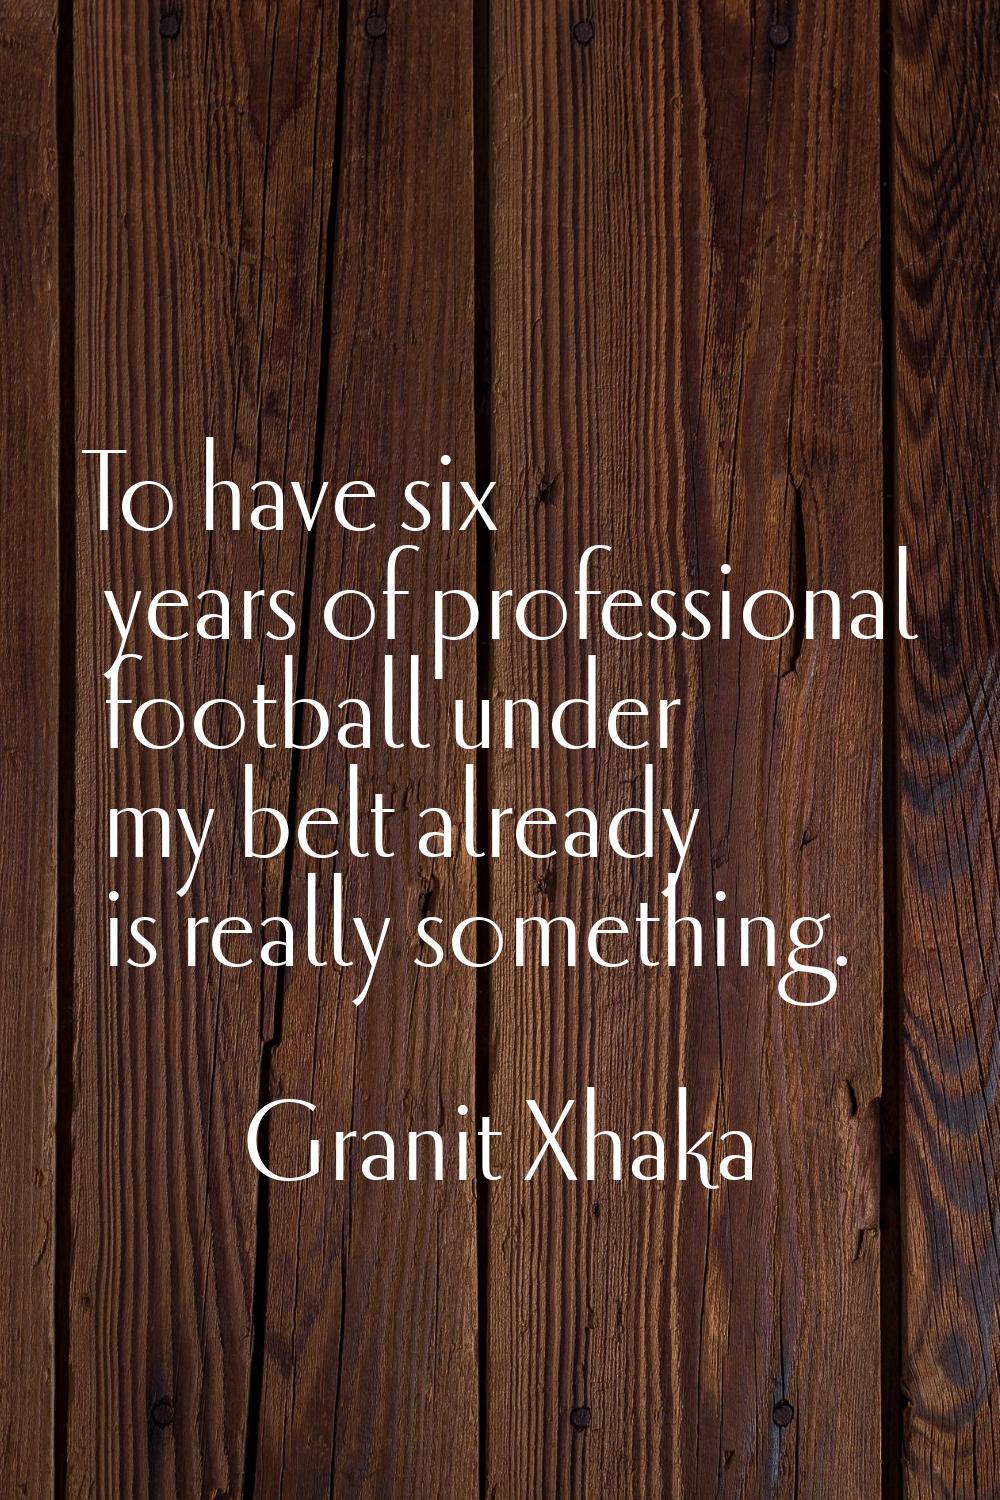 To have six years of professional football under my belt already is really something.